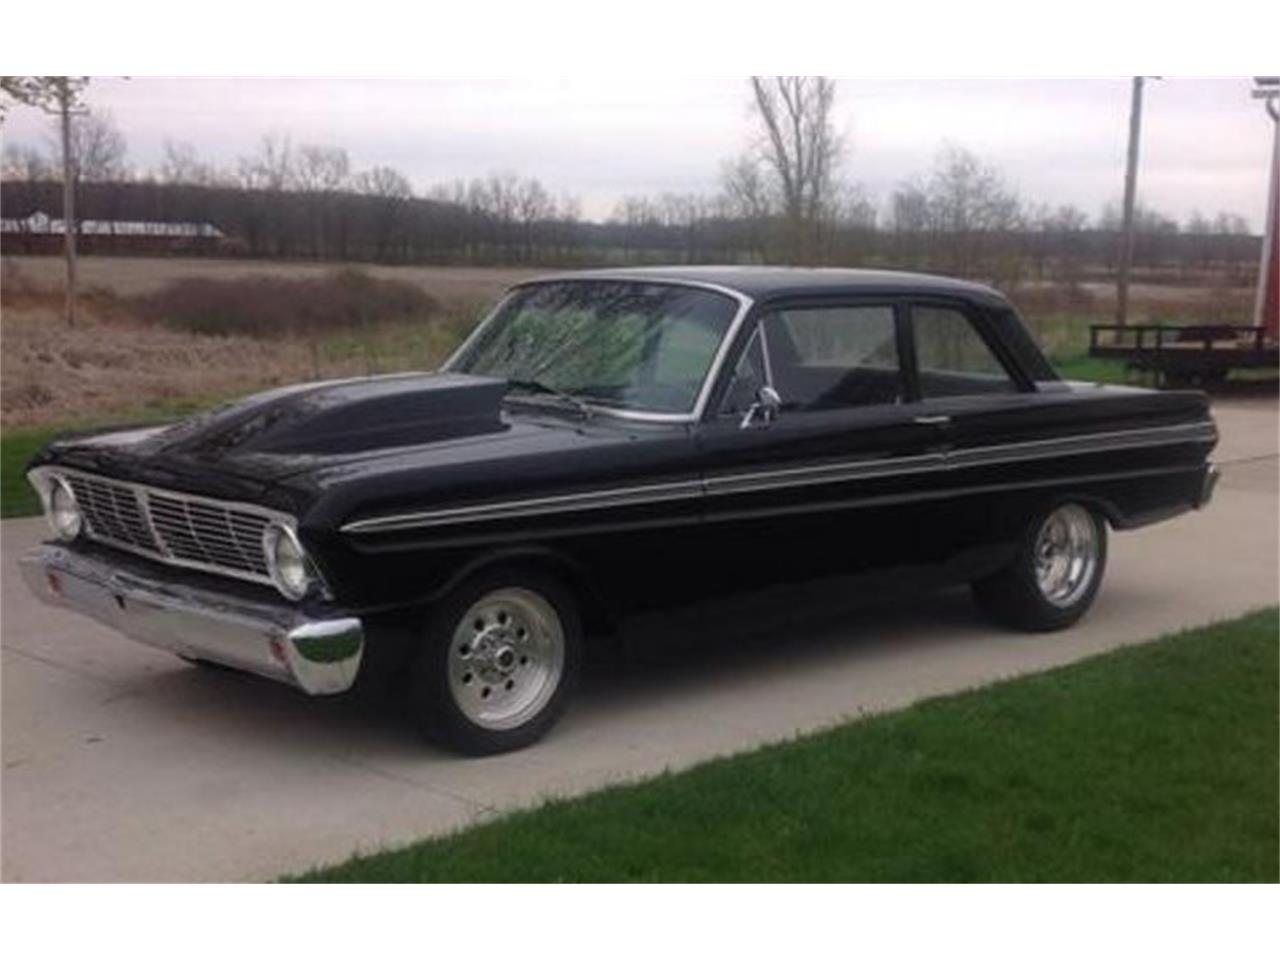 1965 Ford Falcon - Natural Lightweight